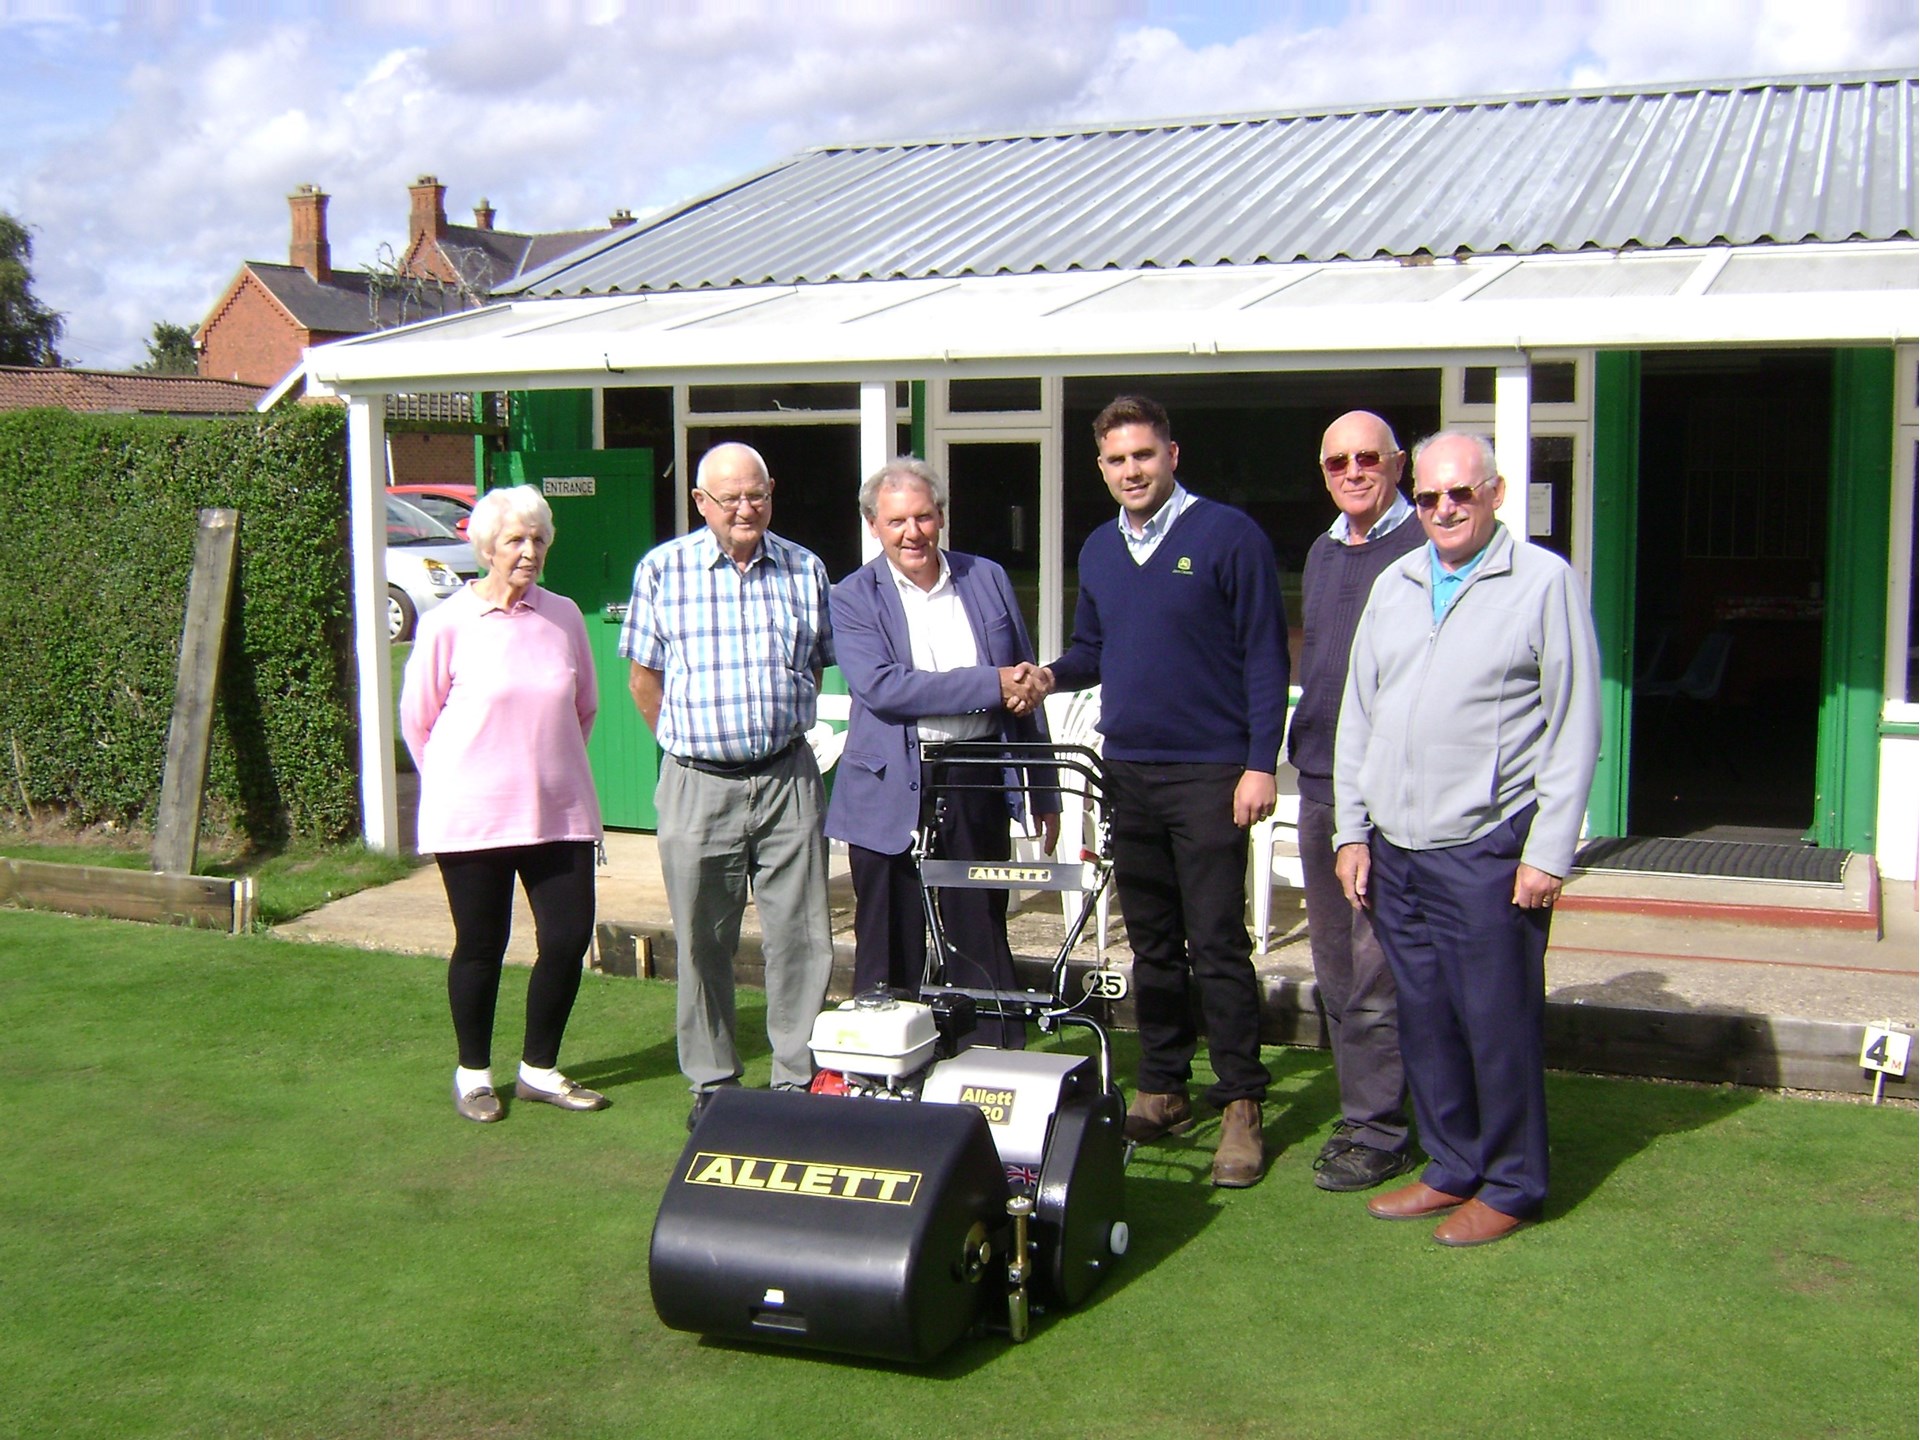 Members of the Committee with our new mower in September, 2018.